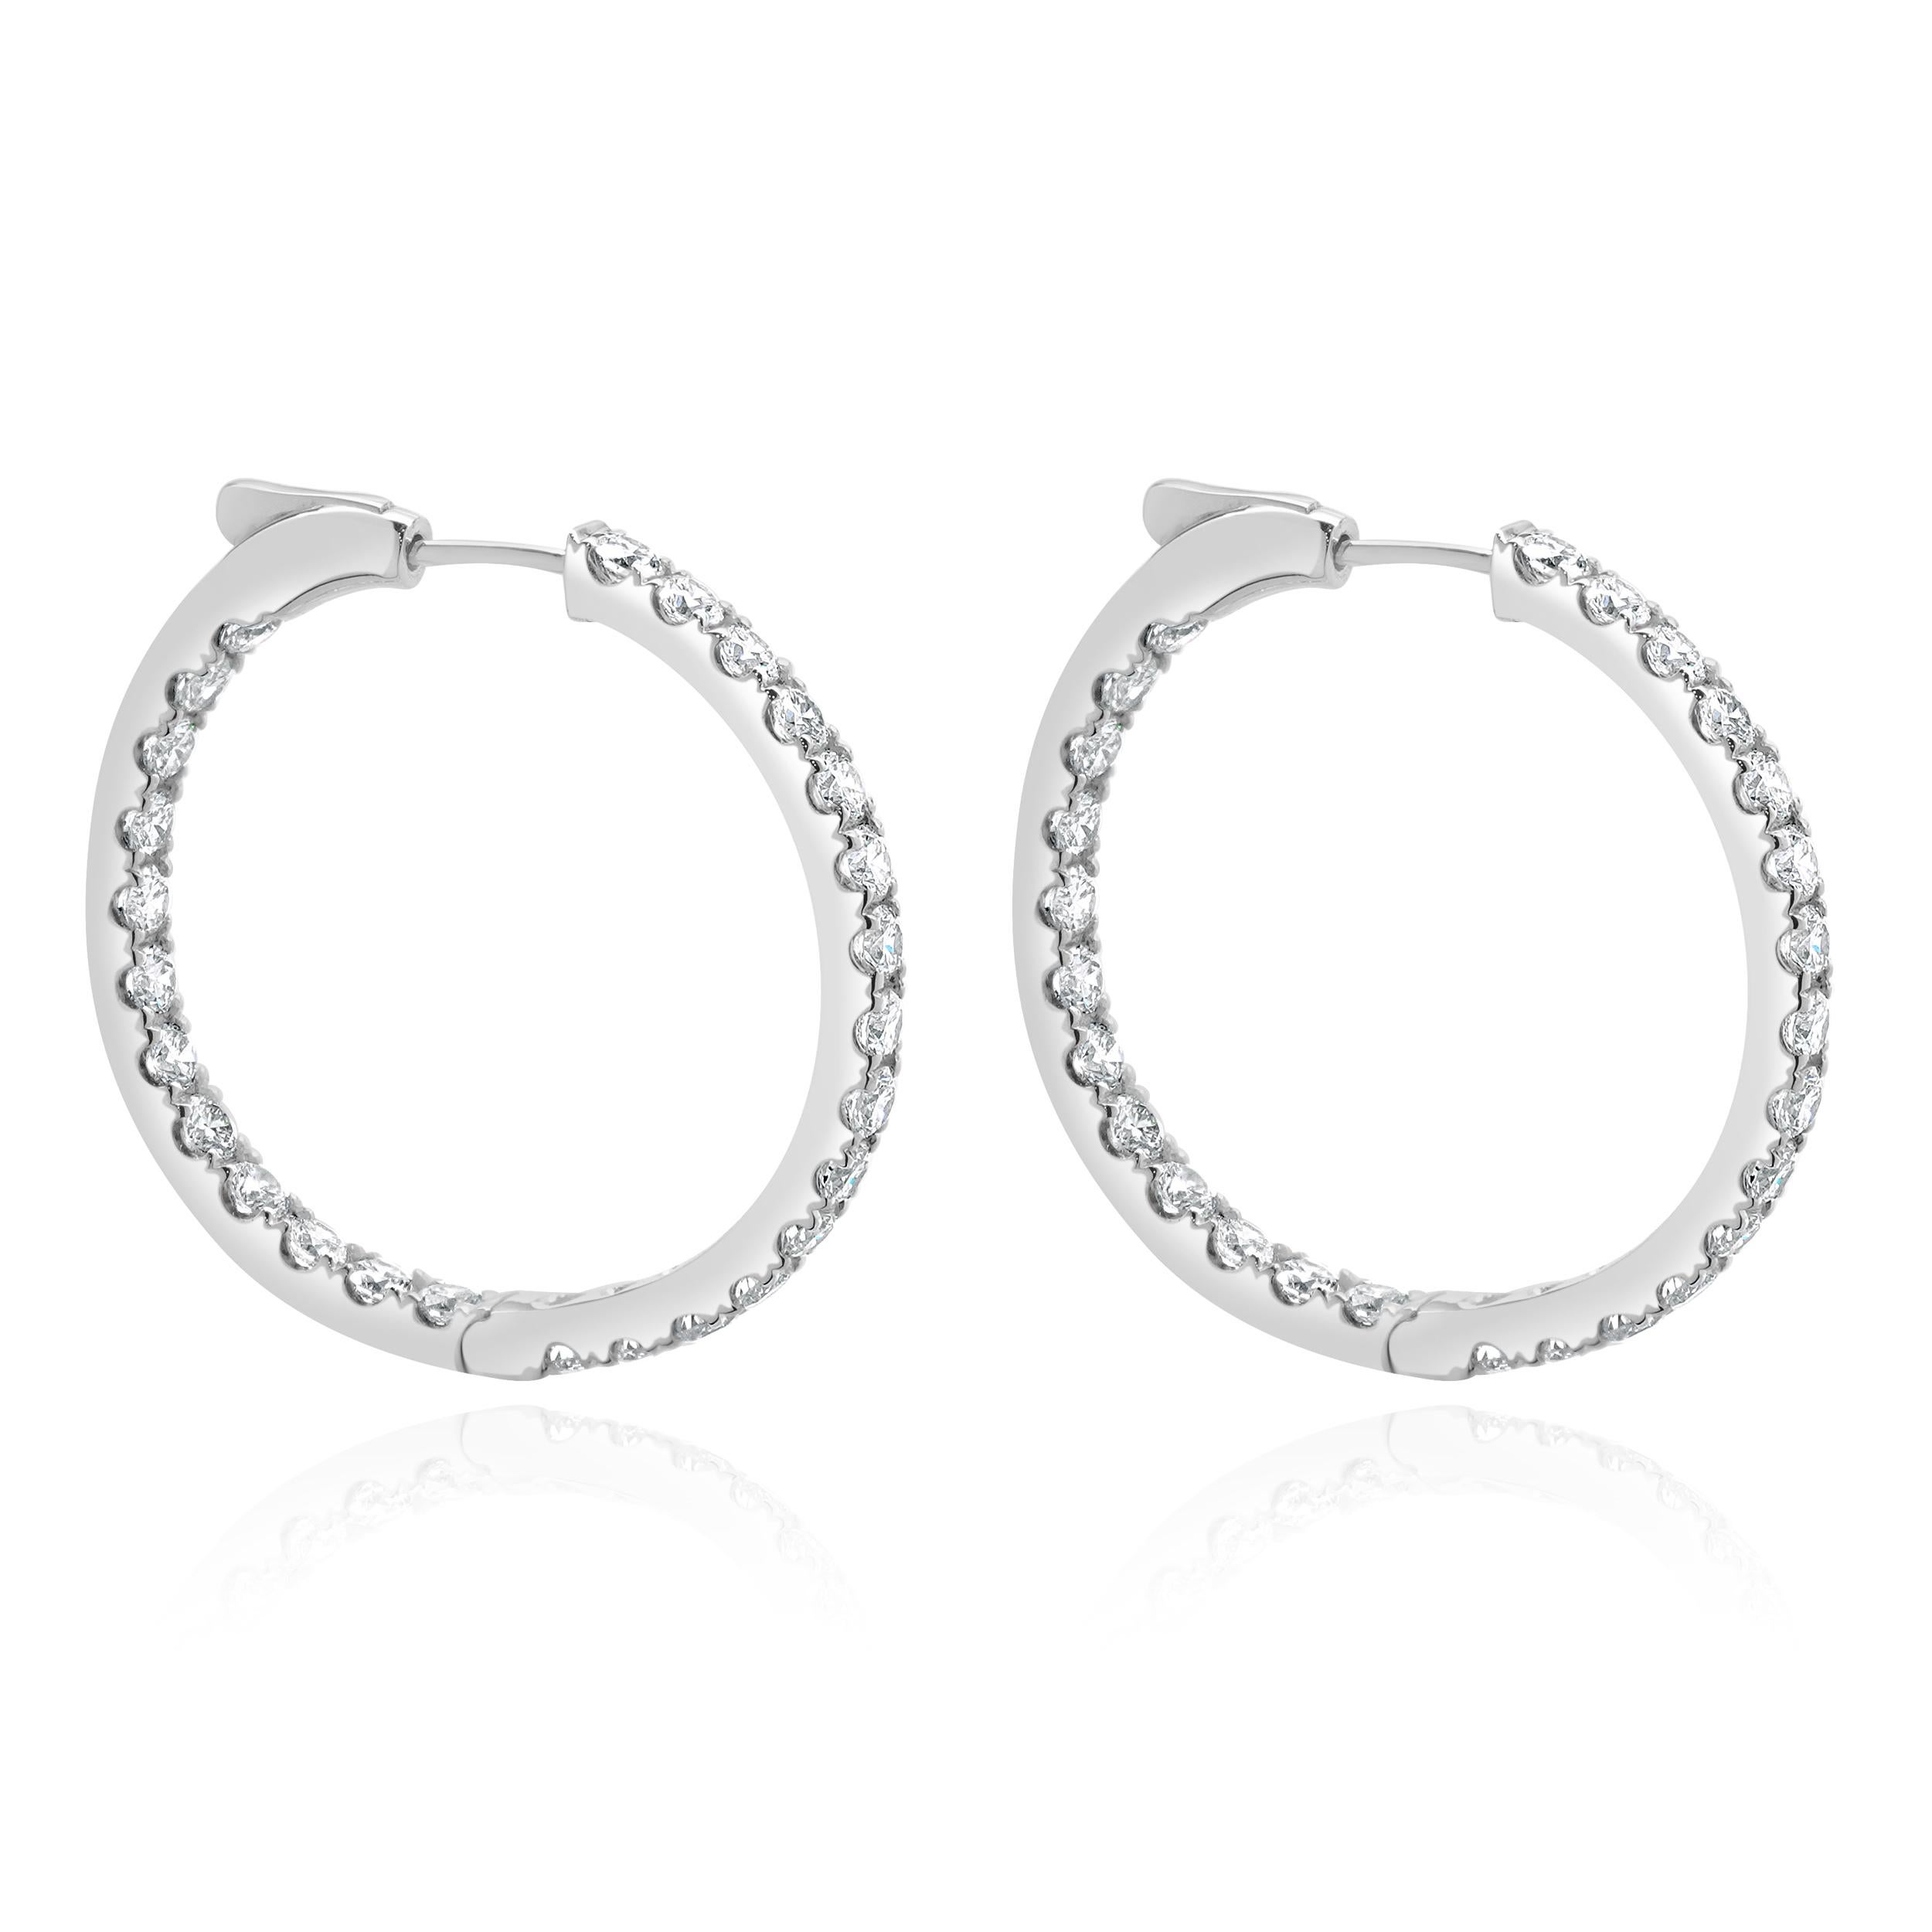 Designer: custom
Material: 14K white gold
Diamond: 54 round brilliant cut = 3.00cttw
Color: G
Clarity: VS2
Dimensions: earrings measure 25mm in length
Weight: 7.20 grams
